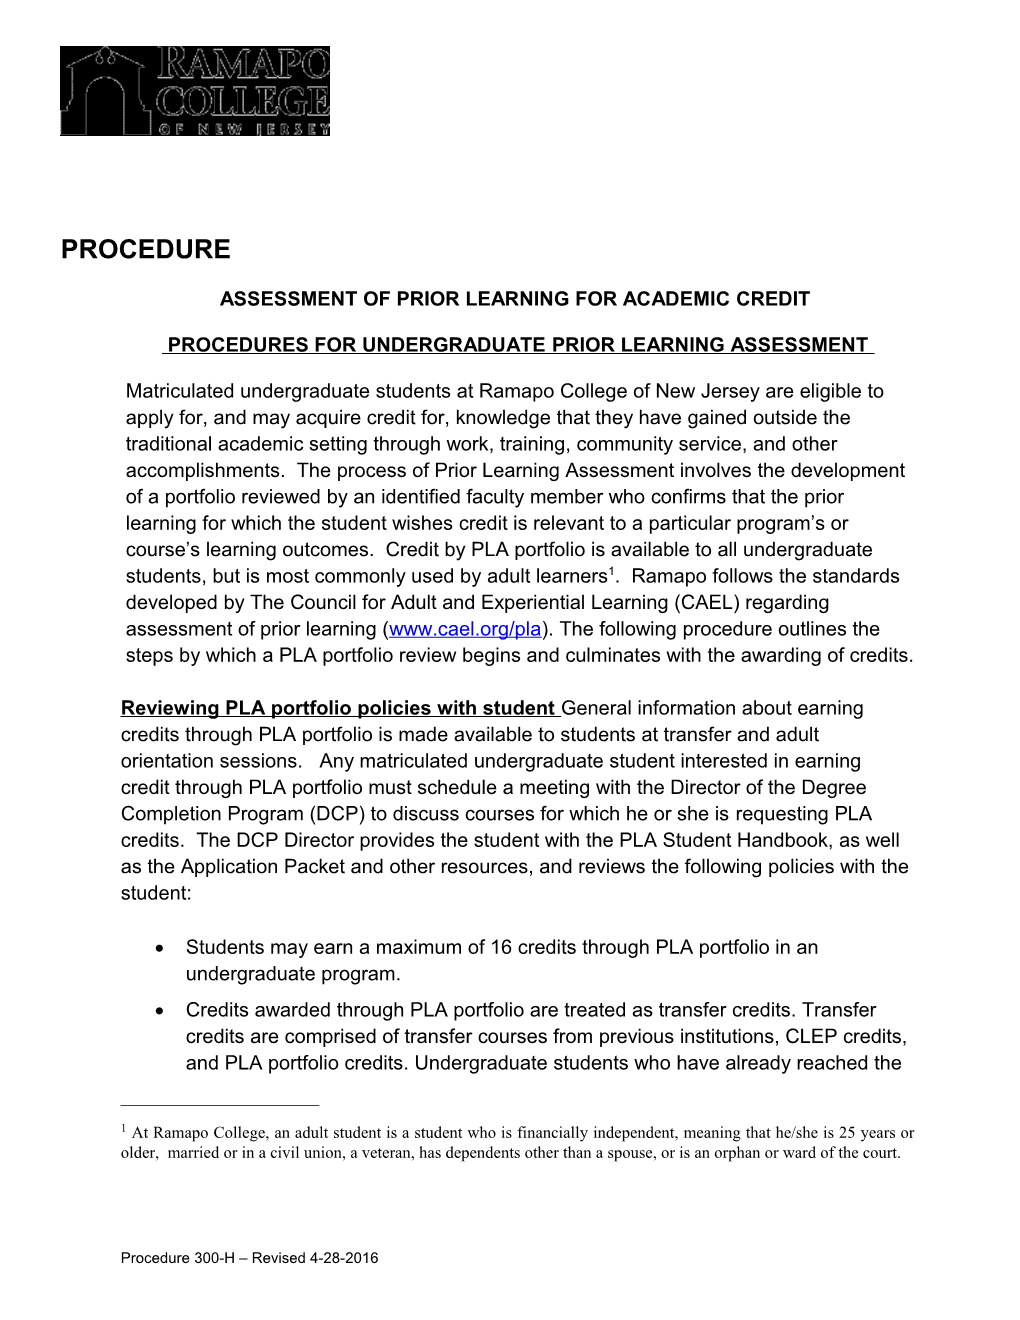 Assessment of Prior Learning for Academic Credit